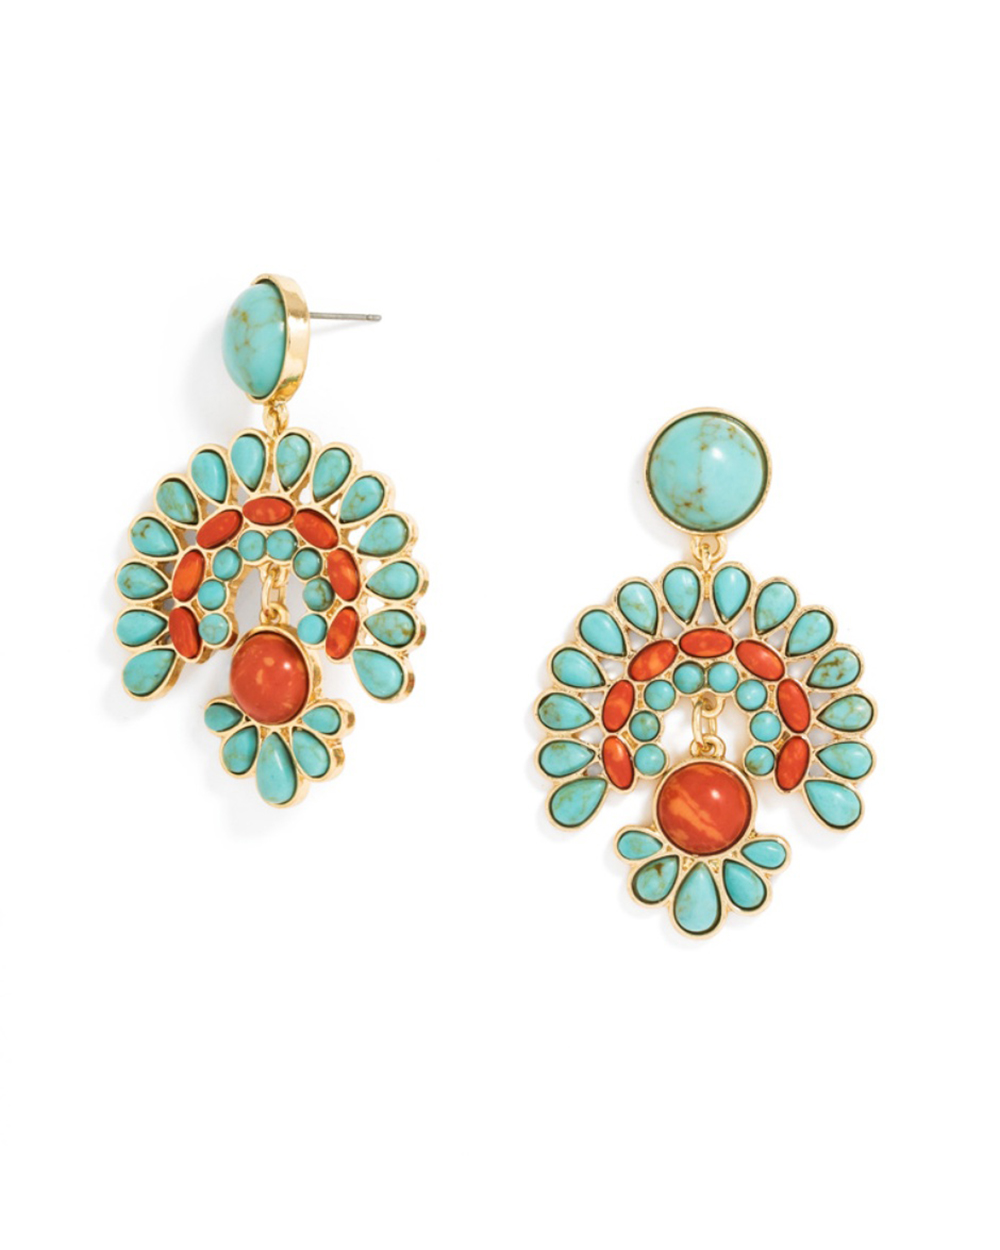 Earrings, approx $38, from Bauble Bar.